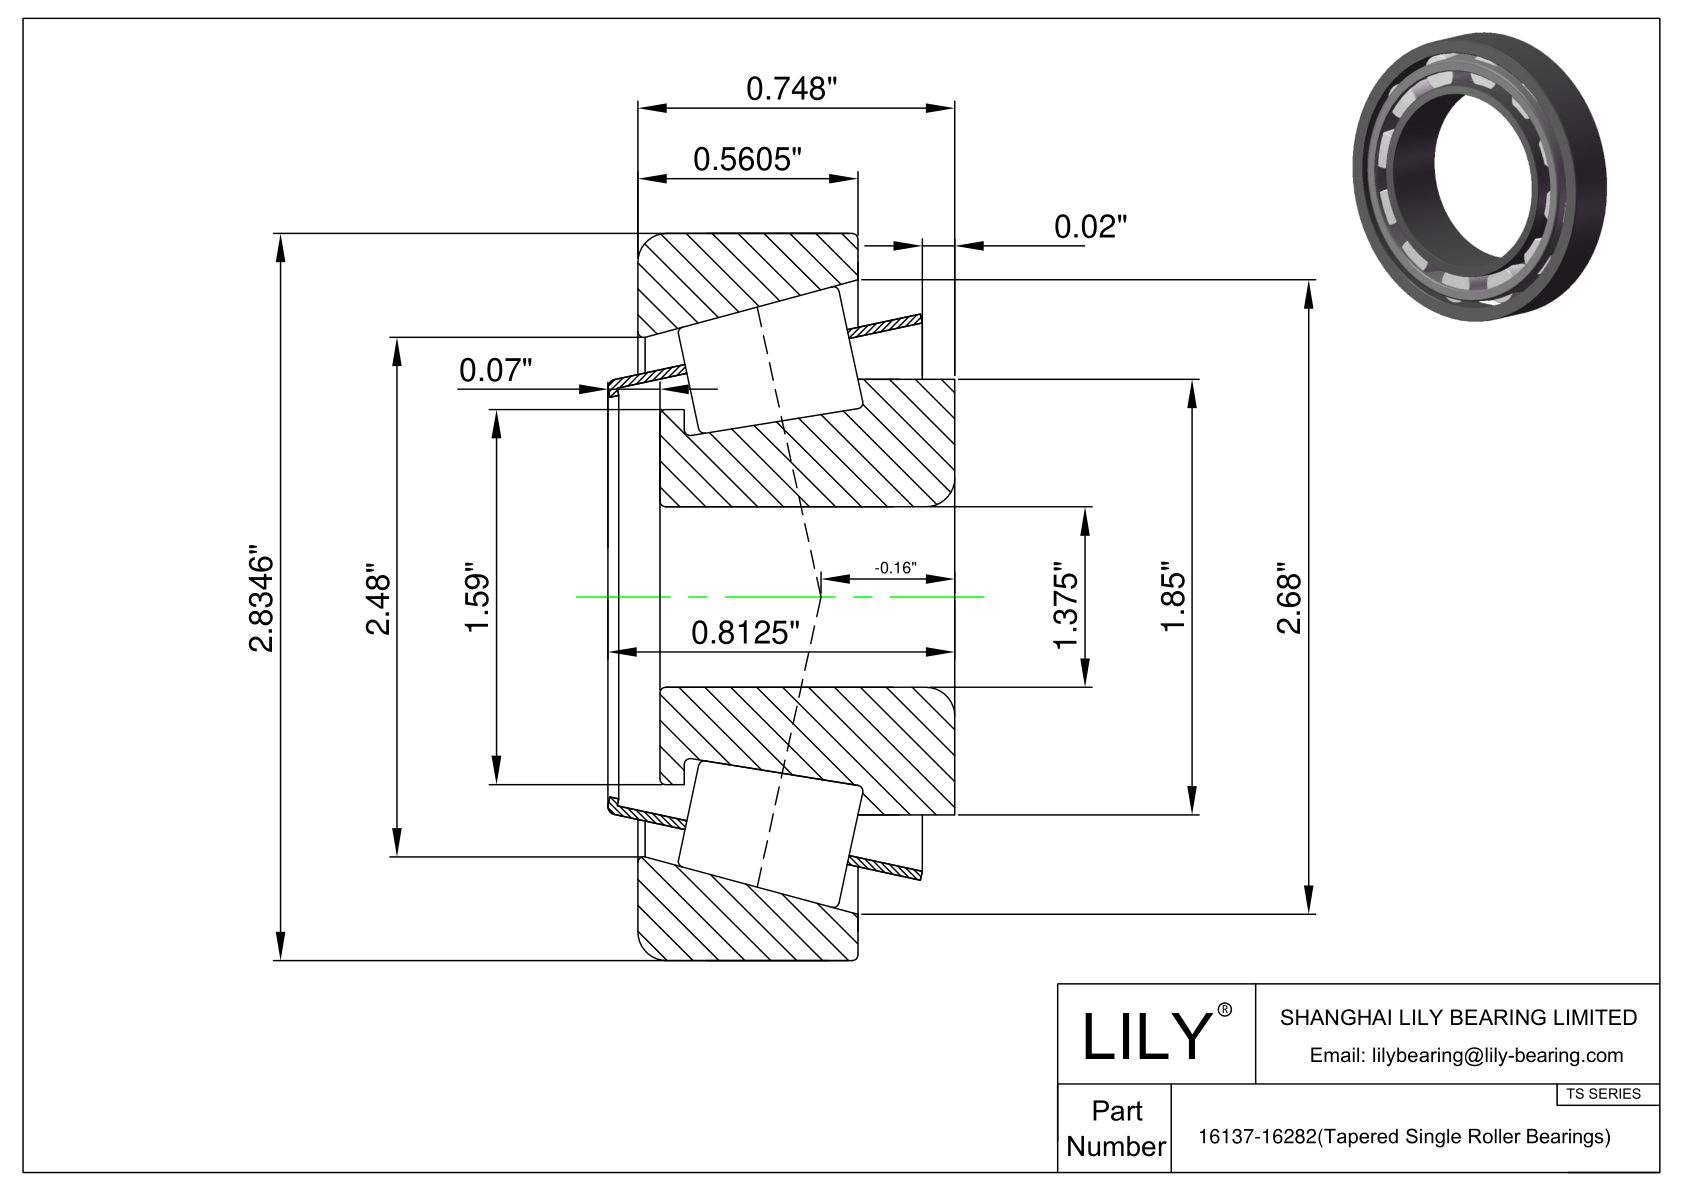 16137-16282 TS (Tapered Single Roller Bearings) (Imperial) cad drawing